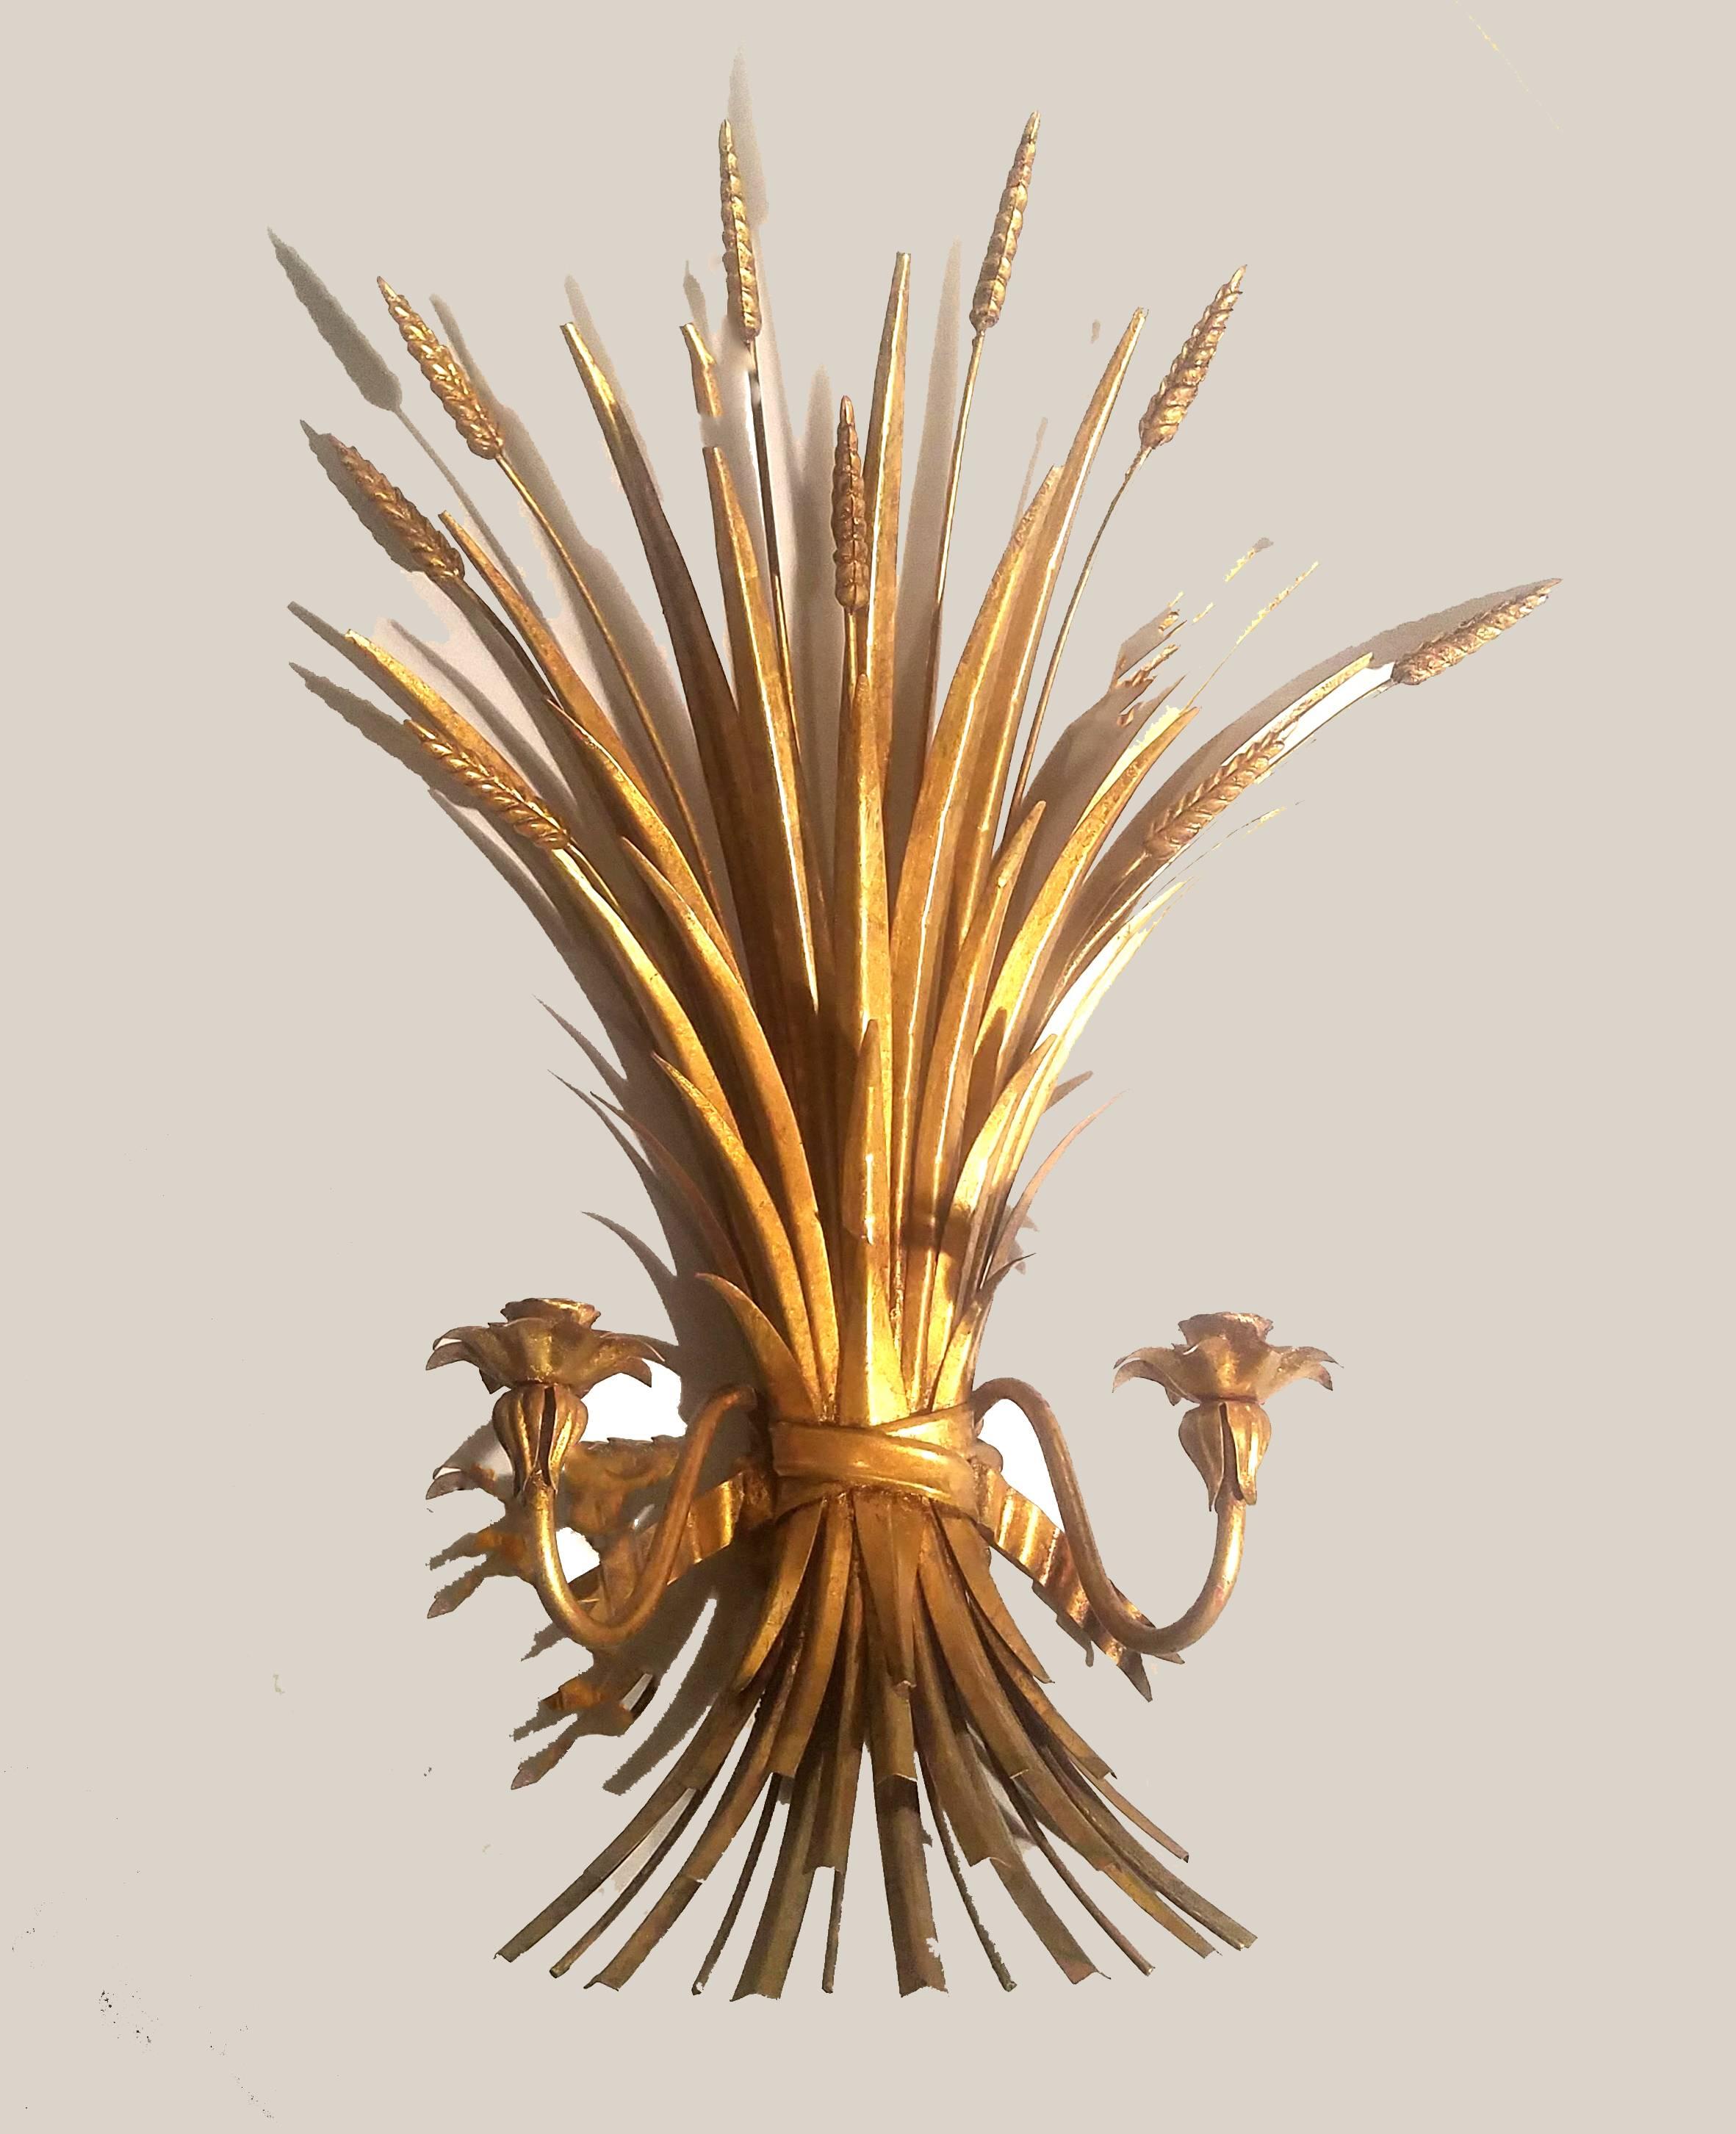 Hollywood Regency midcentury gilt metal wheat sheaf sconces,
Attributed to S. Salvadori - Firenze,
circa 1960s.

The pair of Hollywood Regency gilt metal sheaf of wheat wall sconces each have two candle arms. 

Dimensions: 25 1/4 inches high x